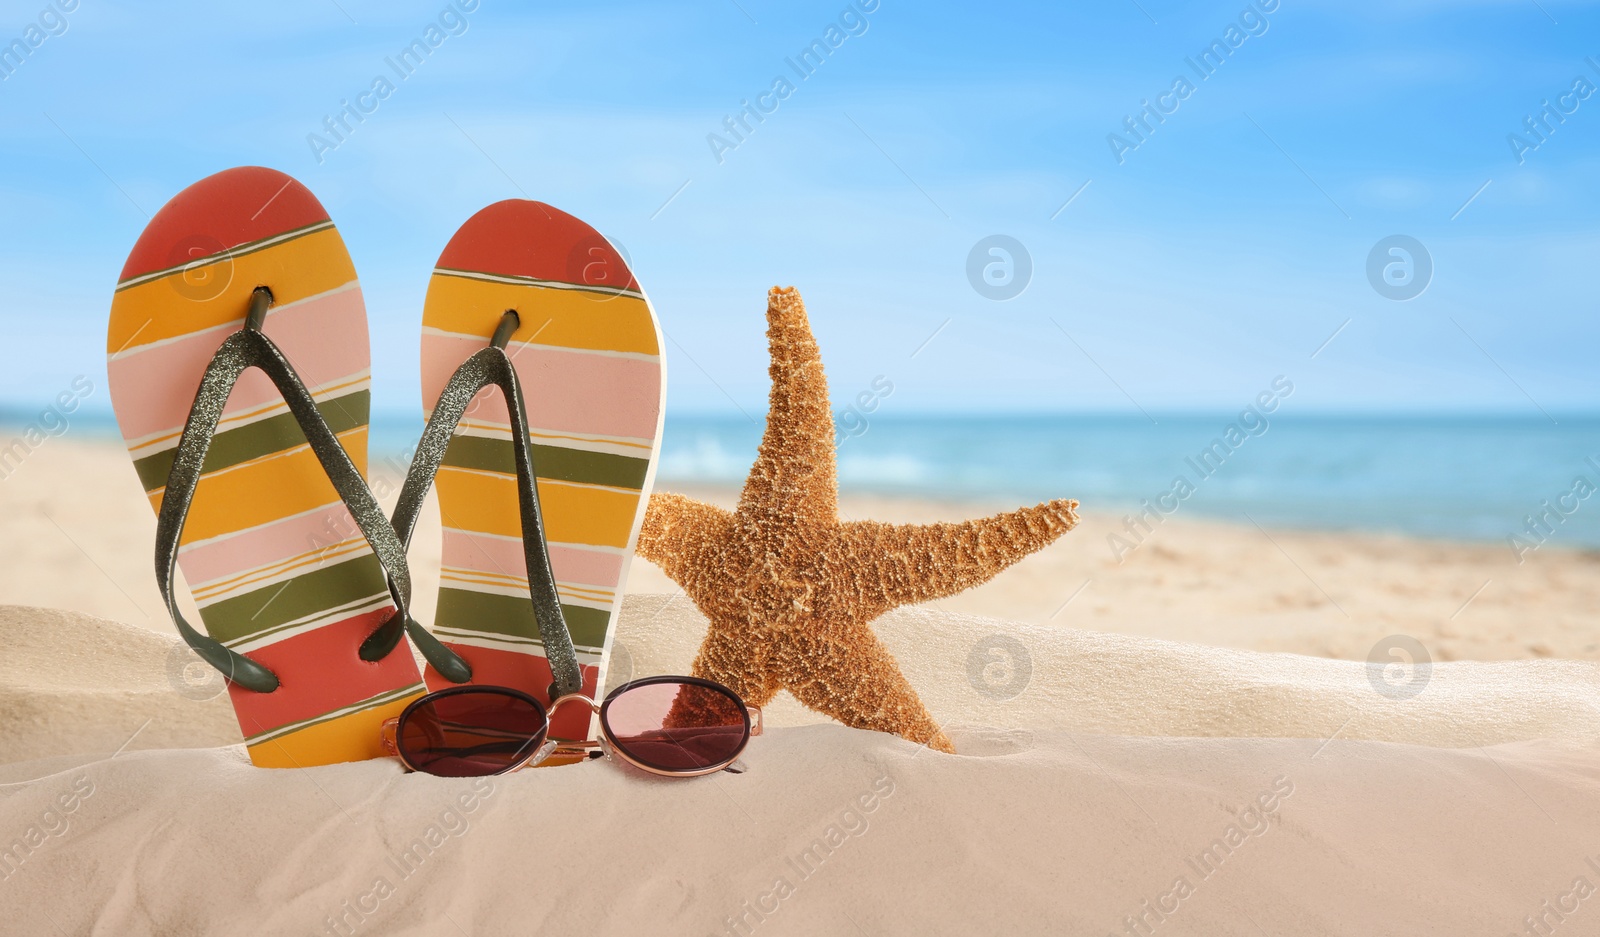 Image of Flip flops and stylish sunglasses on sand near ocean, space for text. Beach accessories